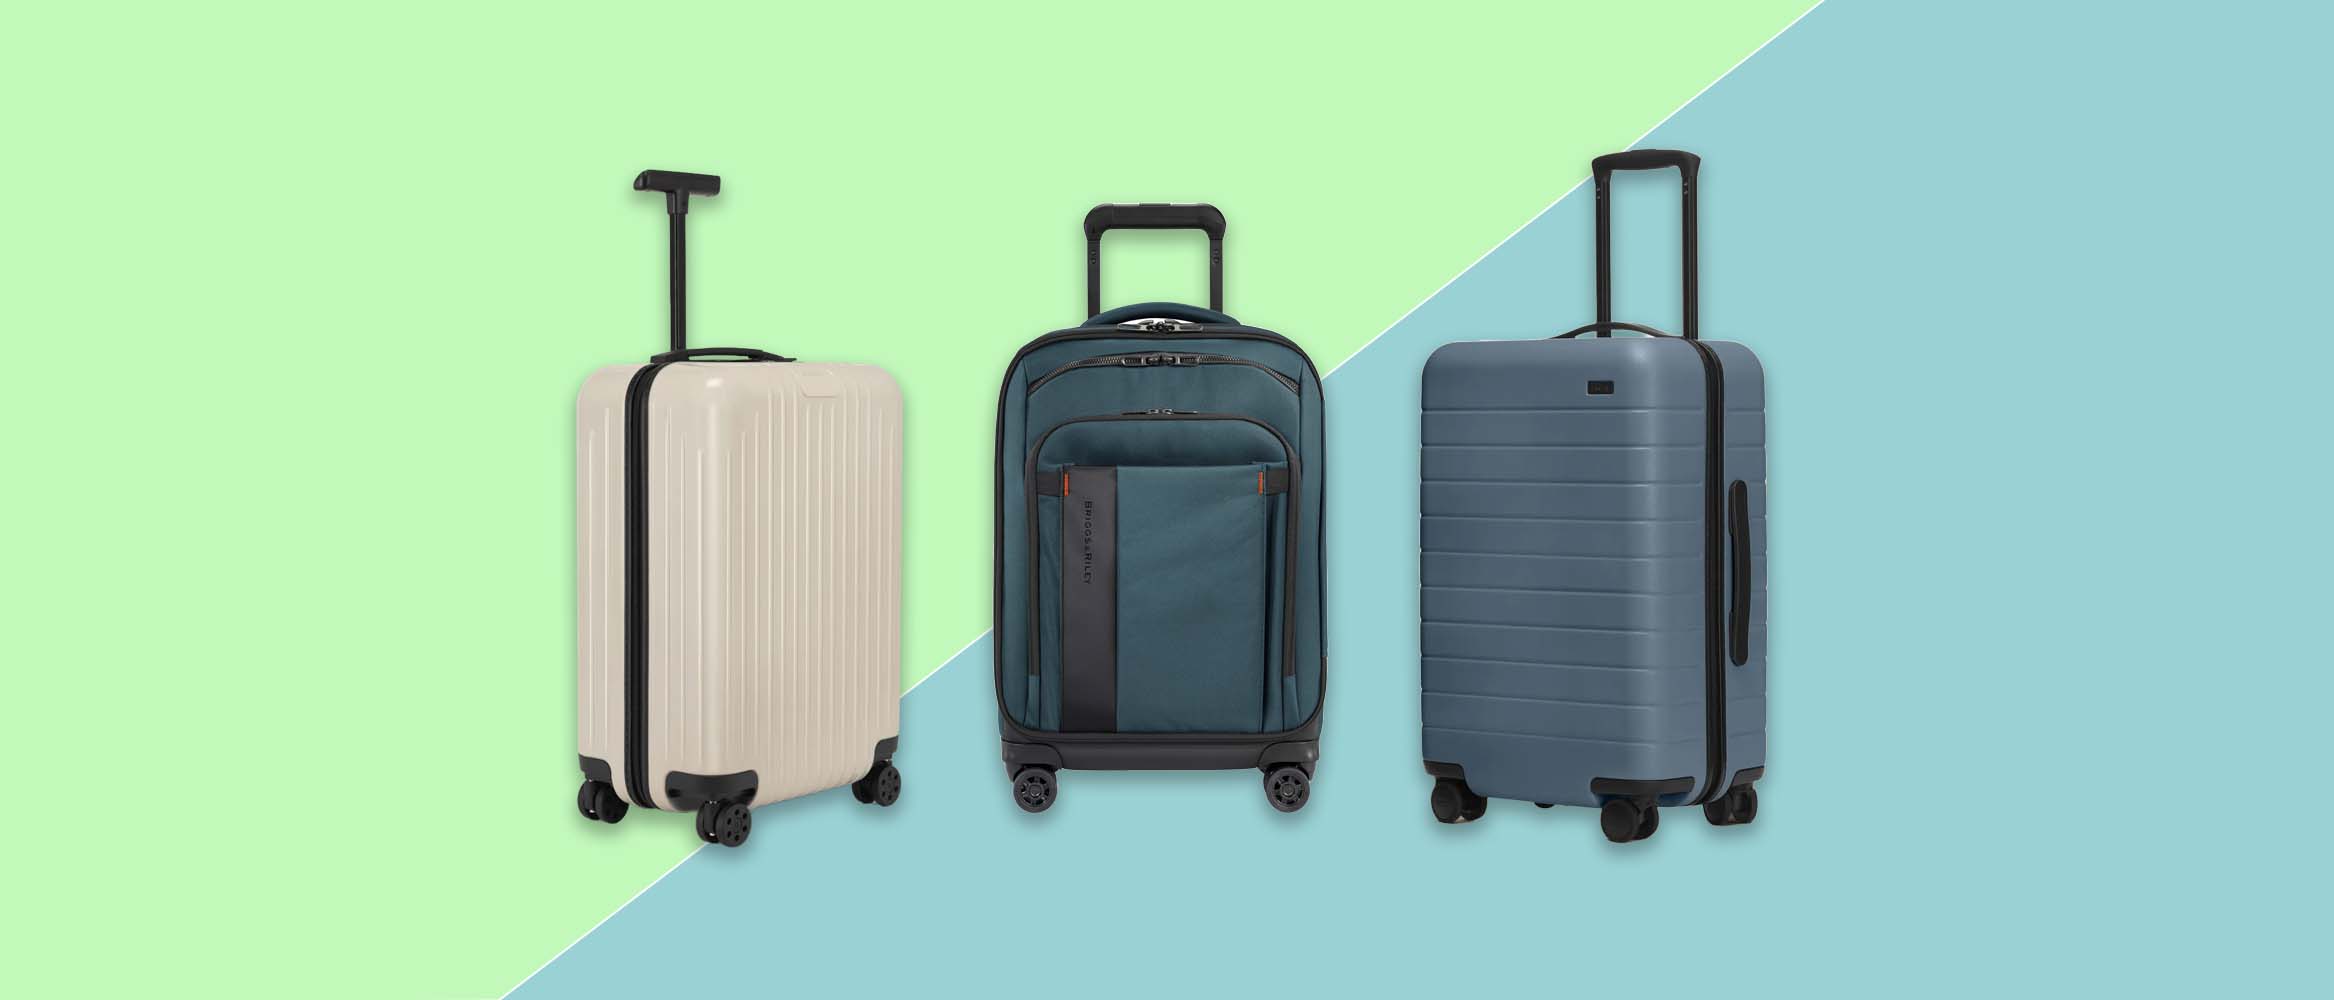 three suitcases from Rimowa, Briggs & Riley and Away